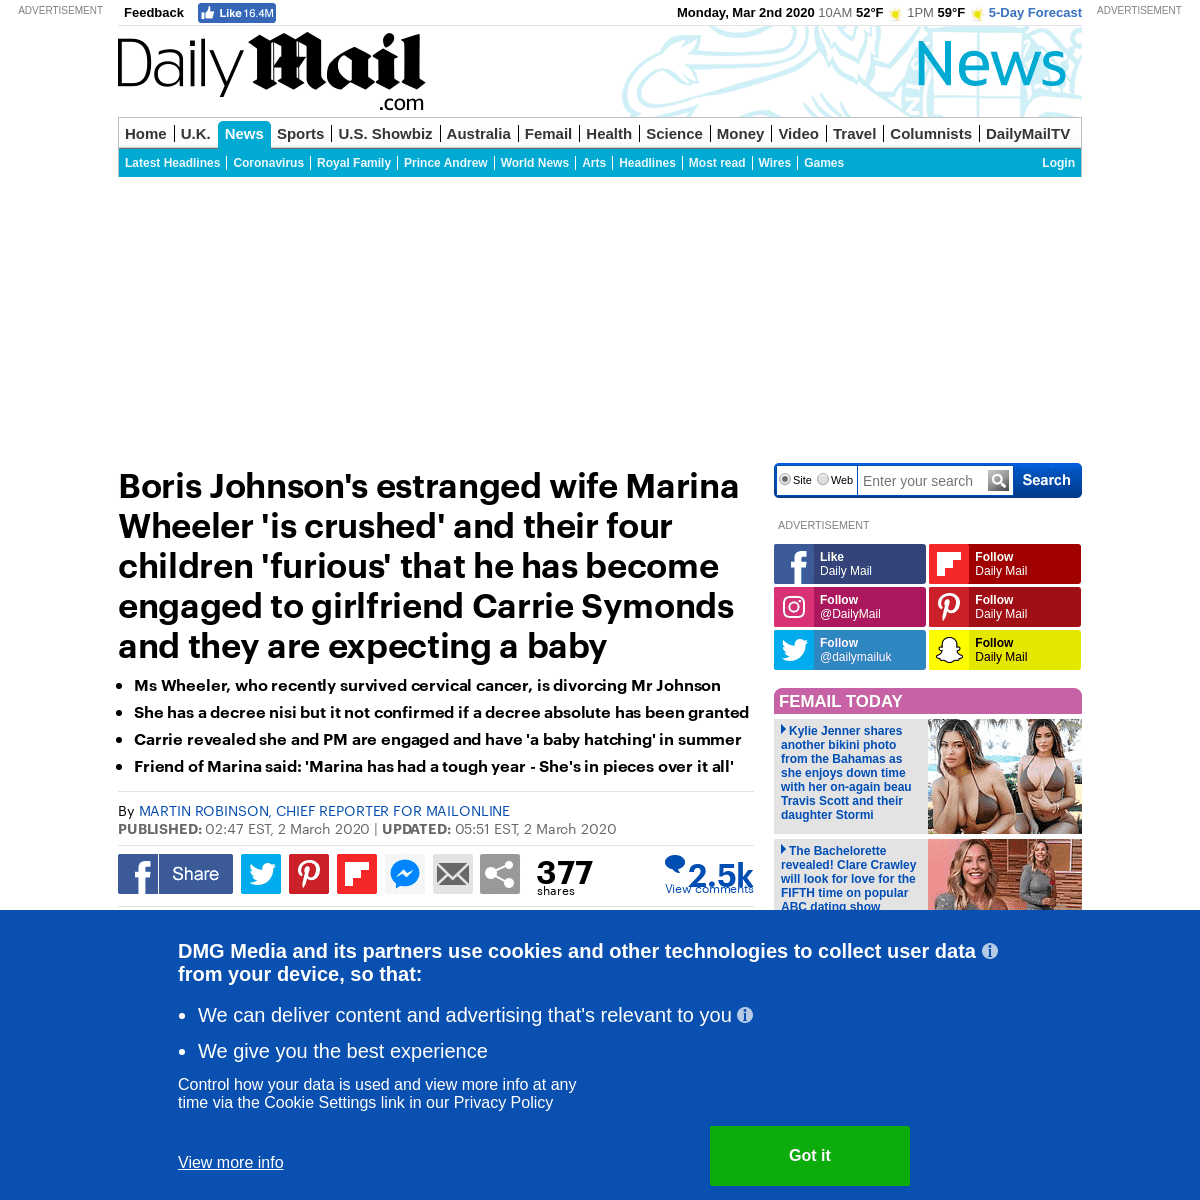 A complete backup of www.dailymail.co.uk/news/article-8064259/Boris-Johnsons-ex-wife-crushed-engaged-girlfriend-Carrie-Symonds.h